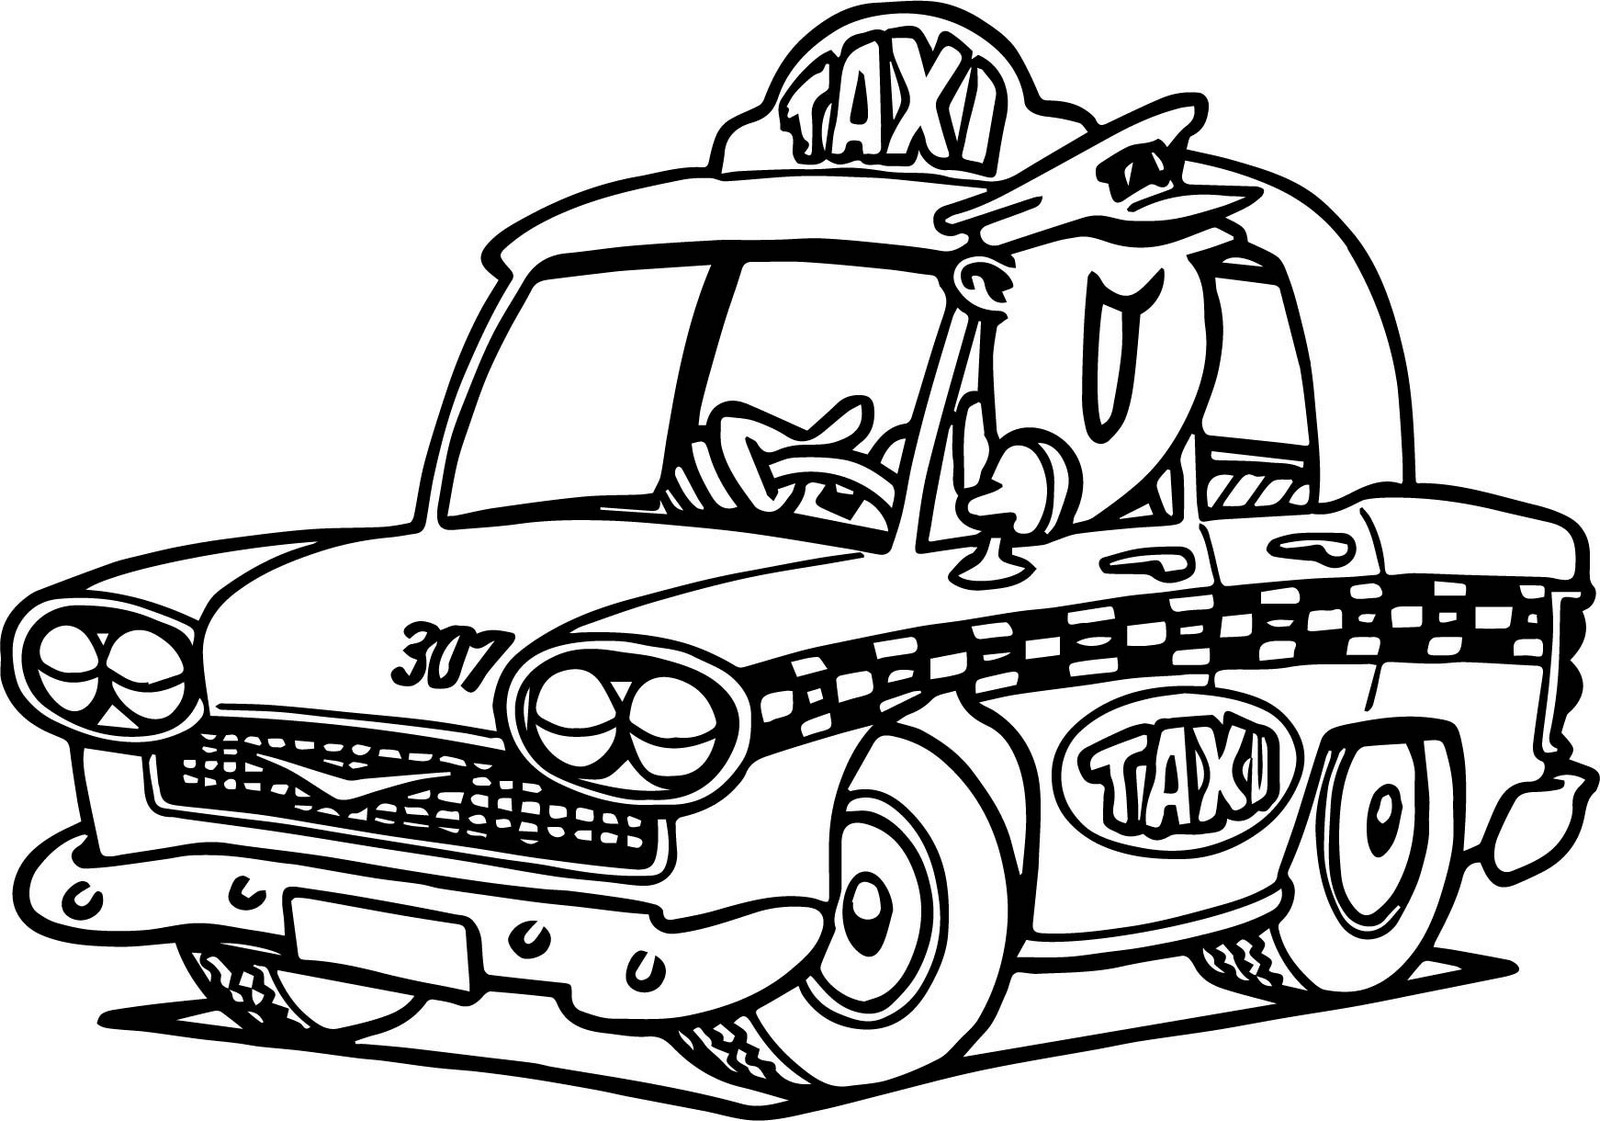 epic taxi car cartoon coloring page for children